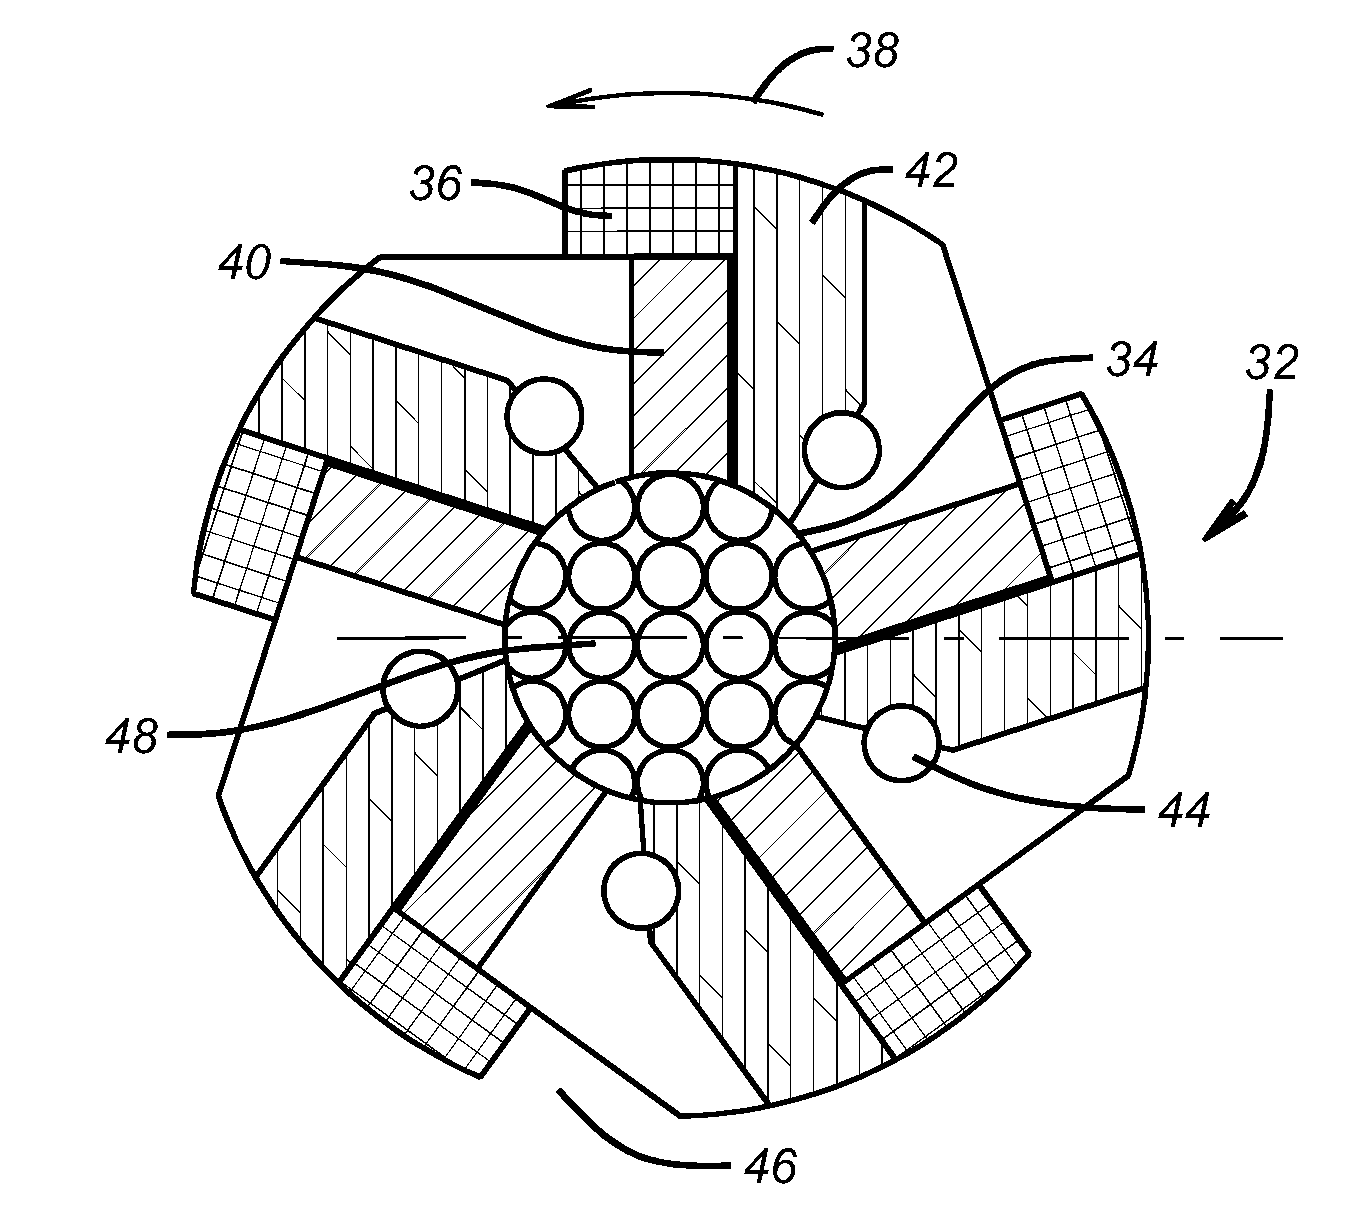 Subterranean Cutting Tool Structure Tailored to Intended Use